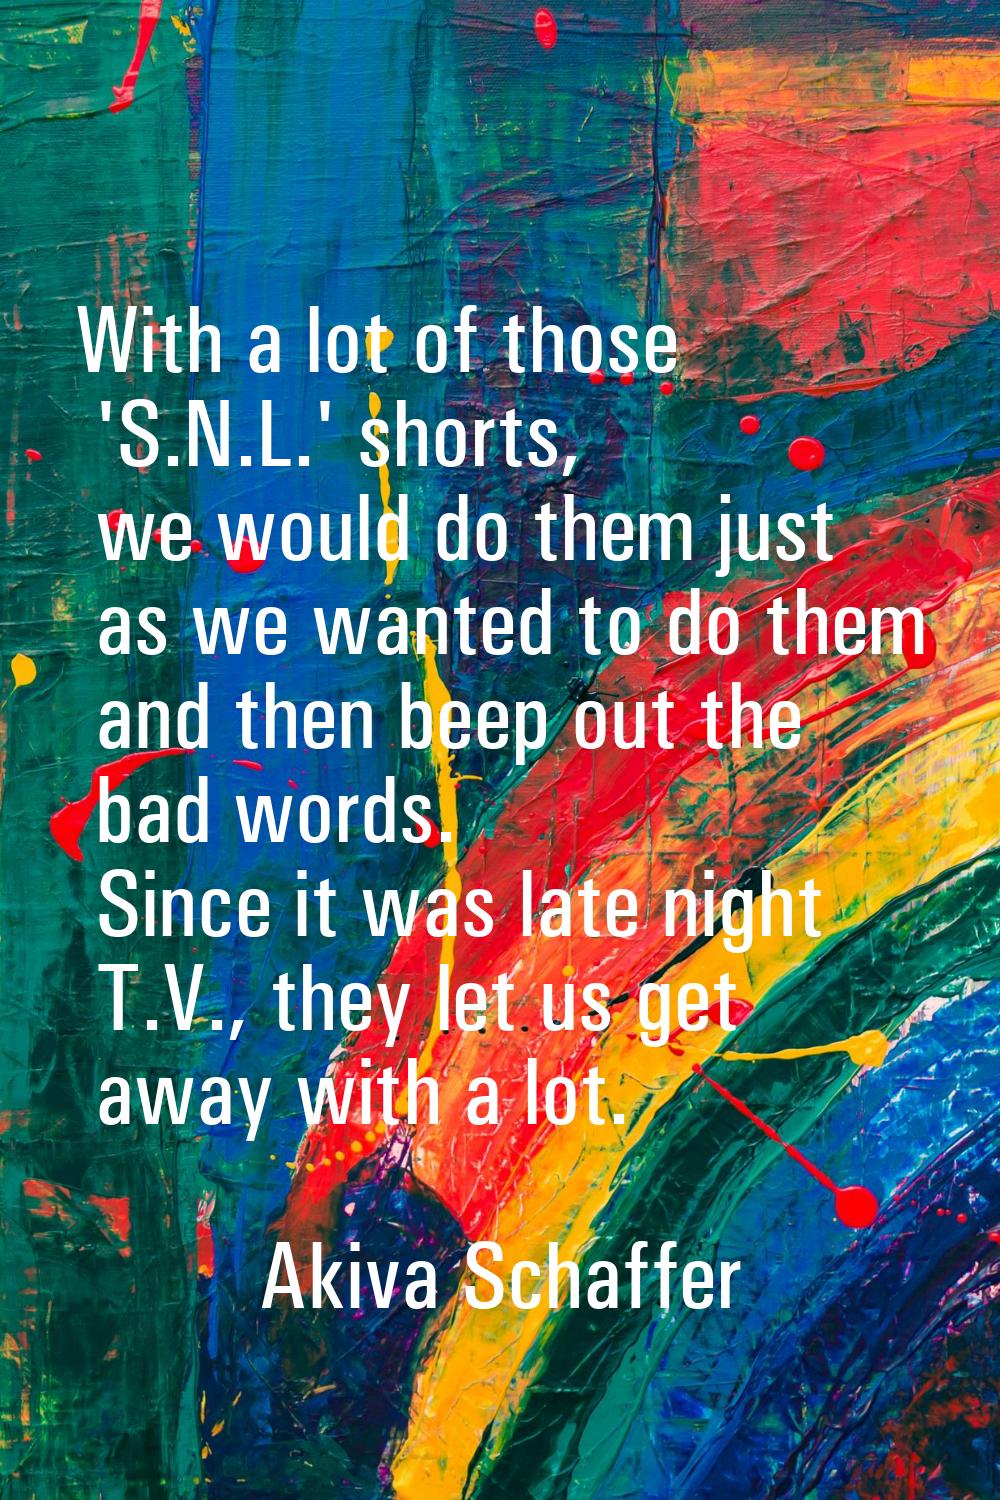 With a lot of those 'S.N.L.' shorts, we would do them just as we wanted to do them and then beep ou